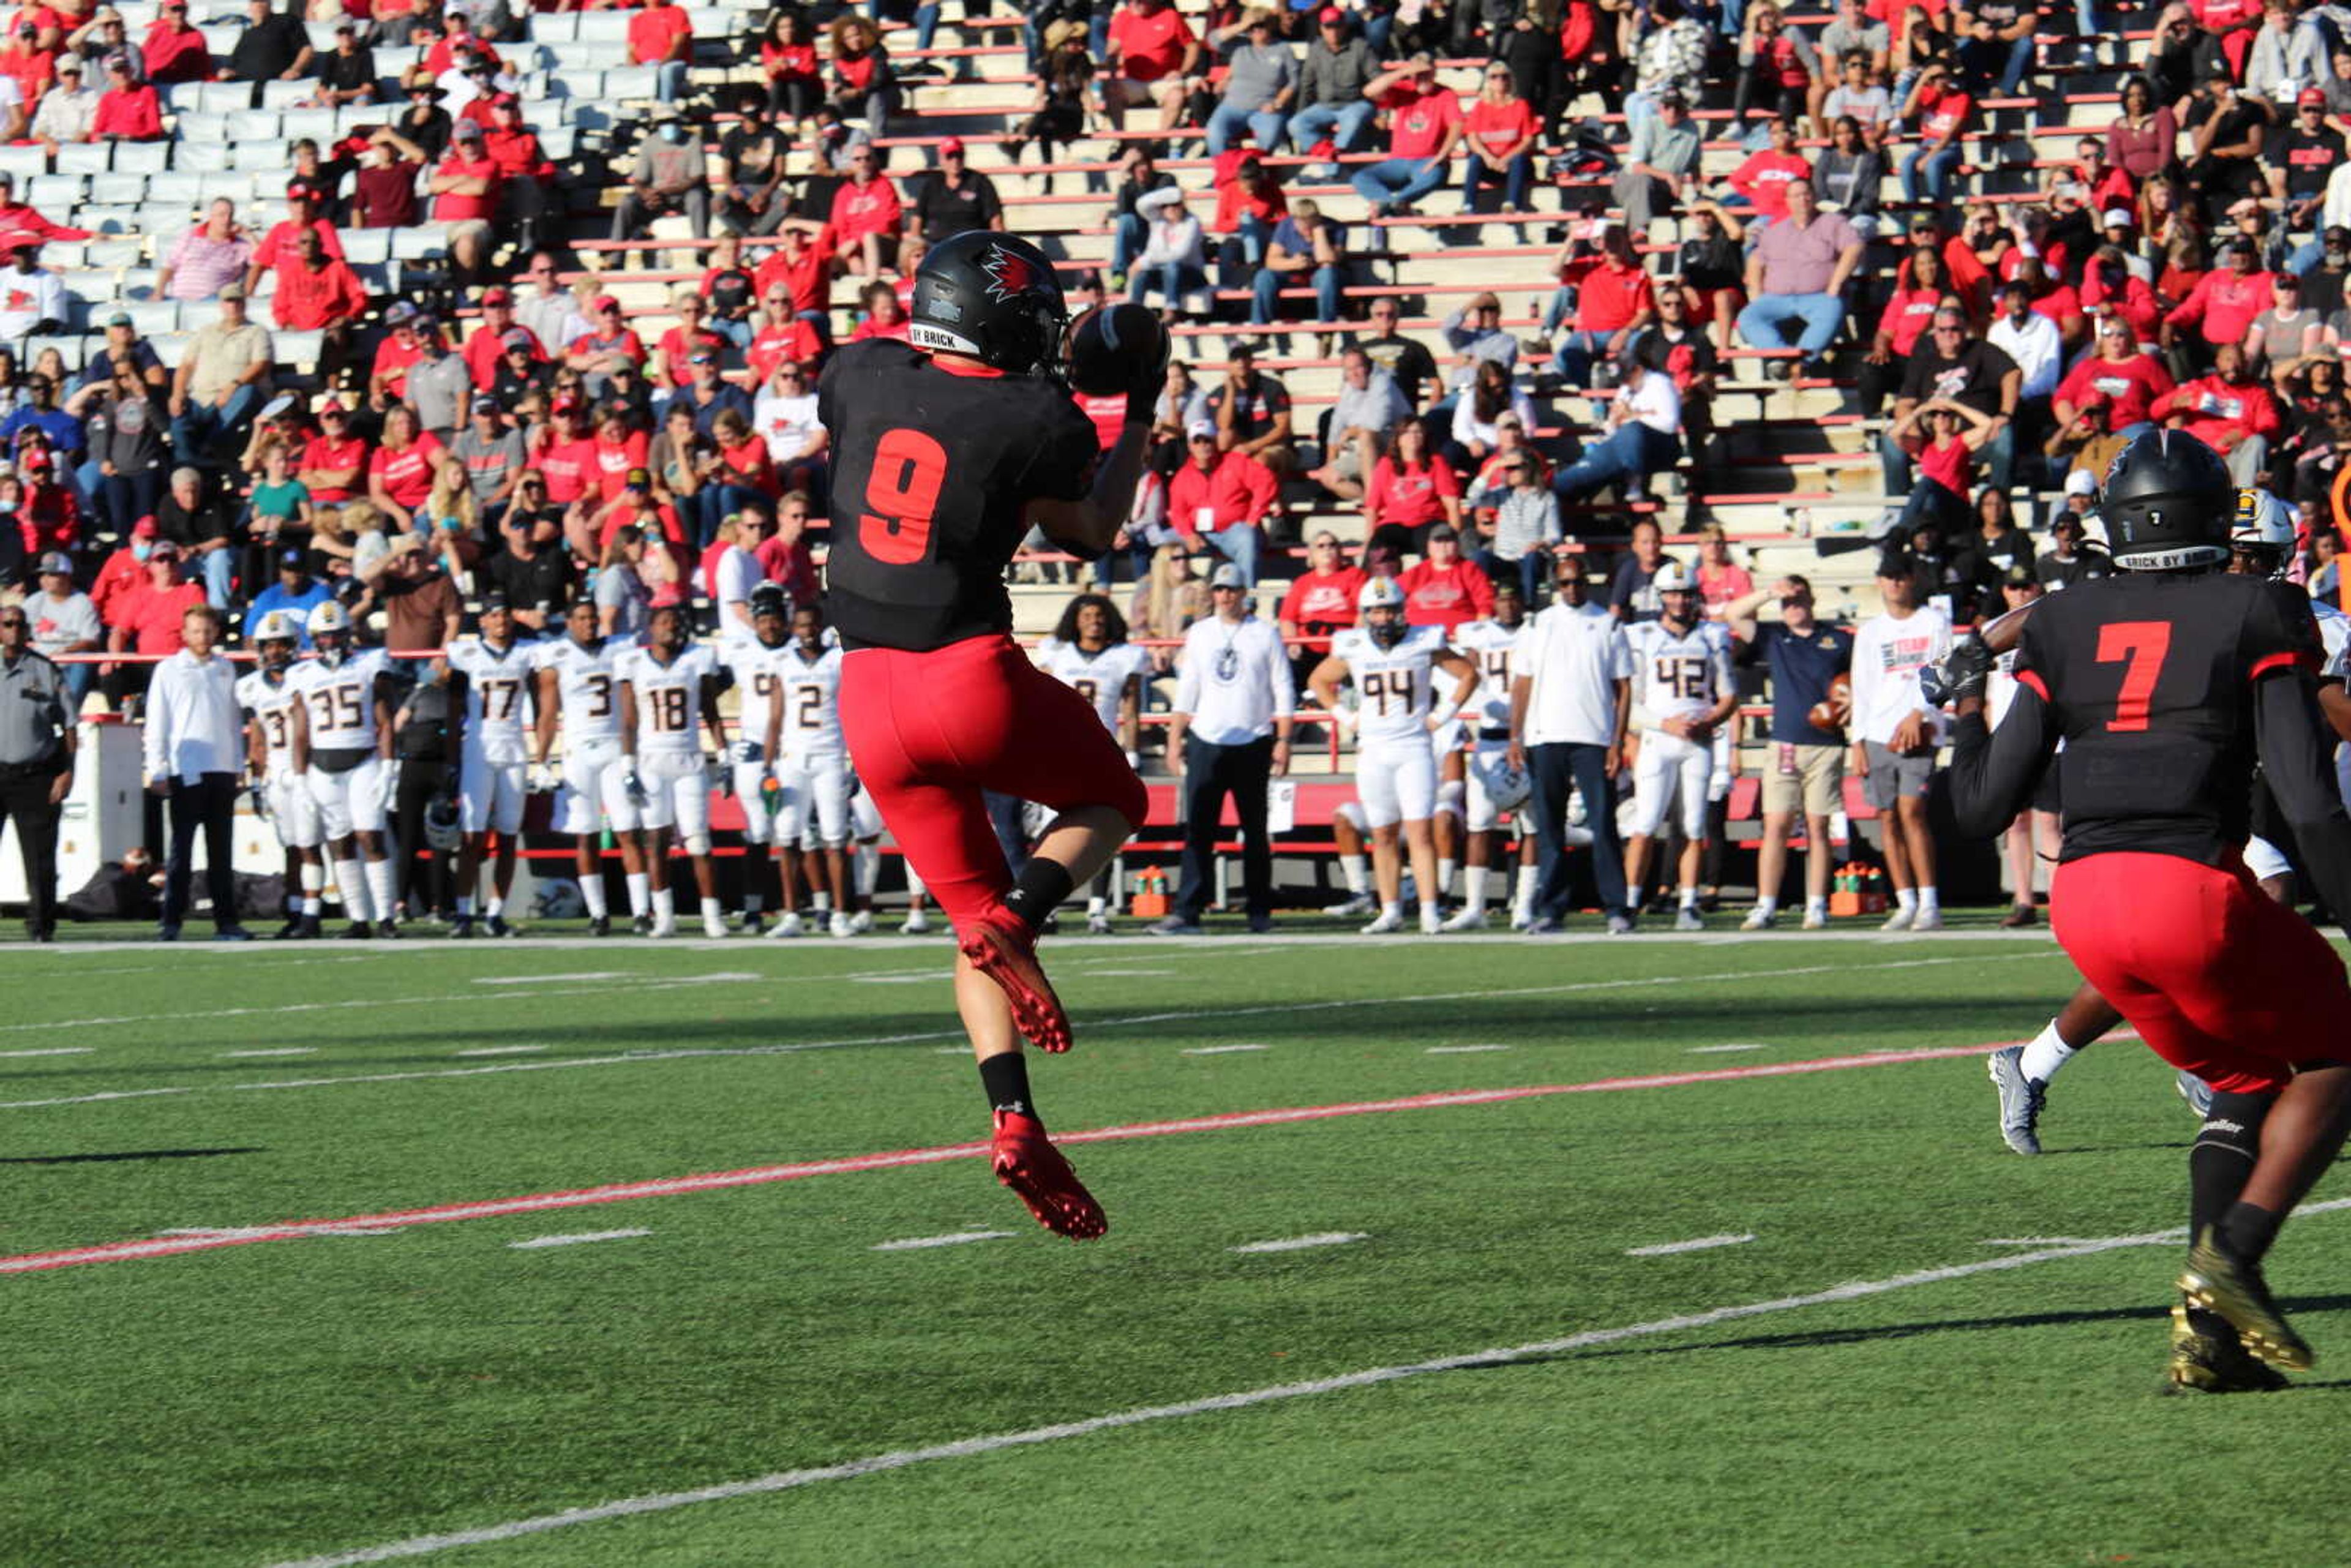 Graduate student Zack Smith makes a jumping catch during Southeast's game against Murray State on Oct. 16. The Redhawks fell to the Racers 32-31.